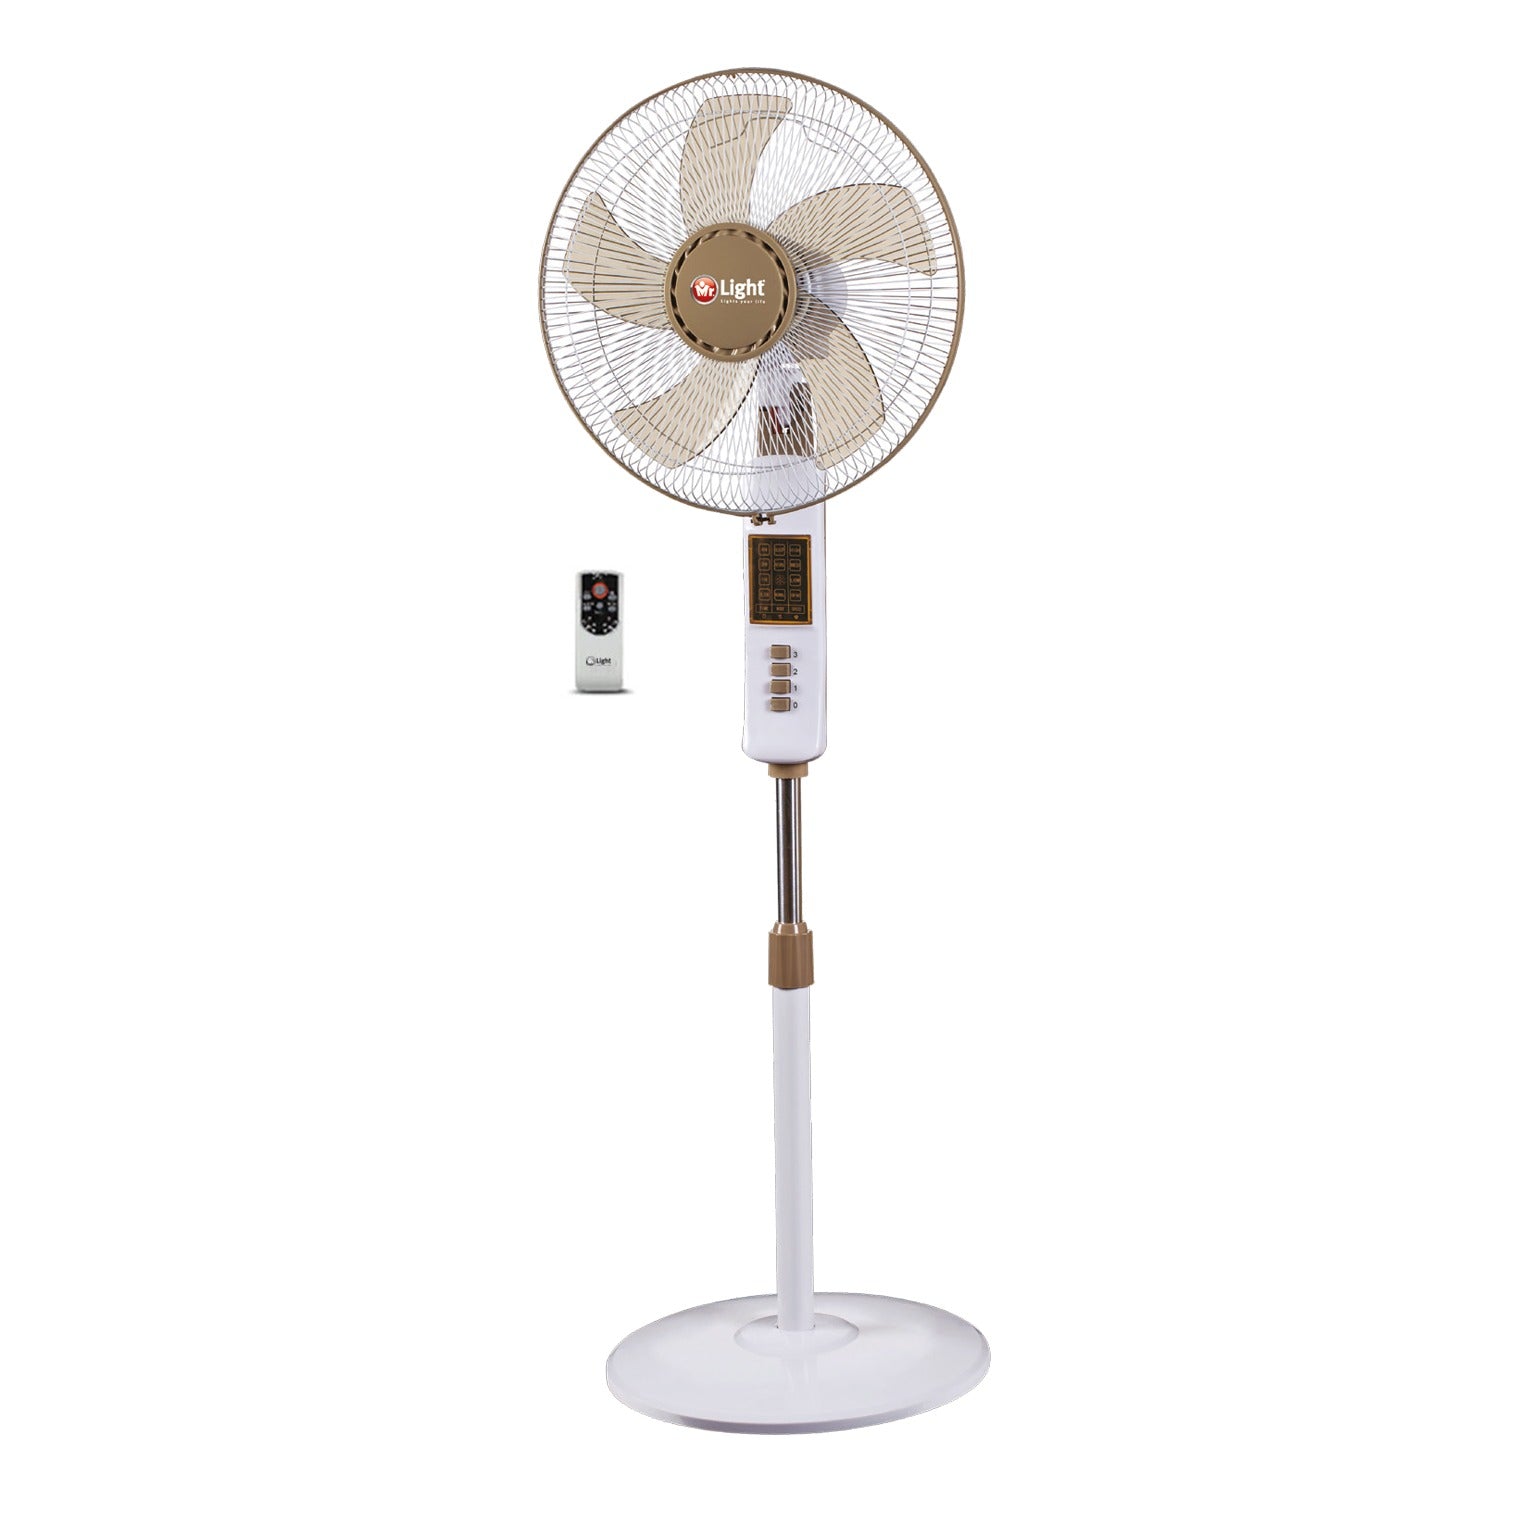 Mr Light 16 inch Stand Fan with Remote 70W - MR3421SFRC | in Bahrain | Halabh.com